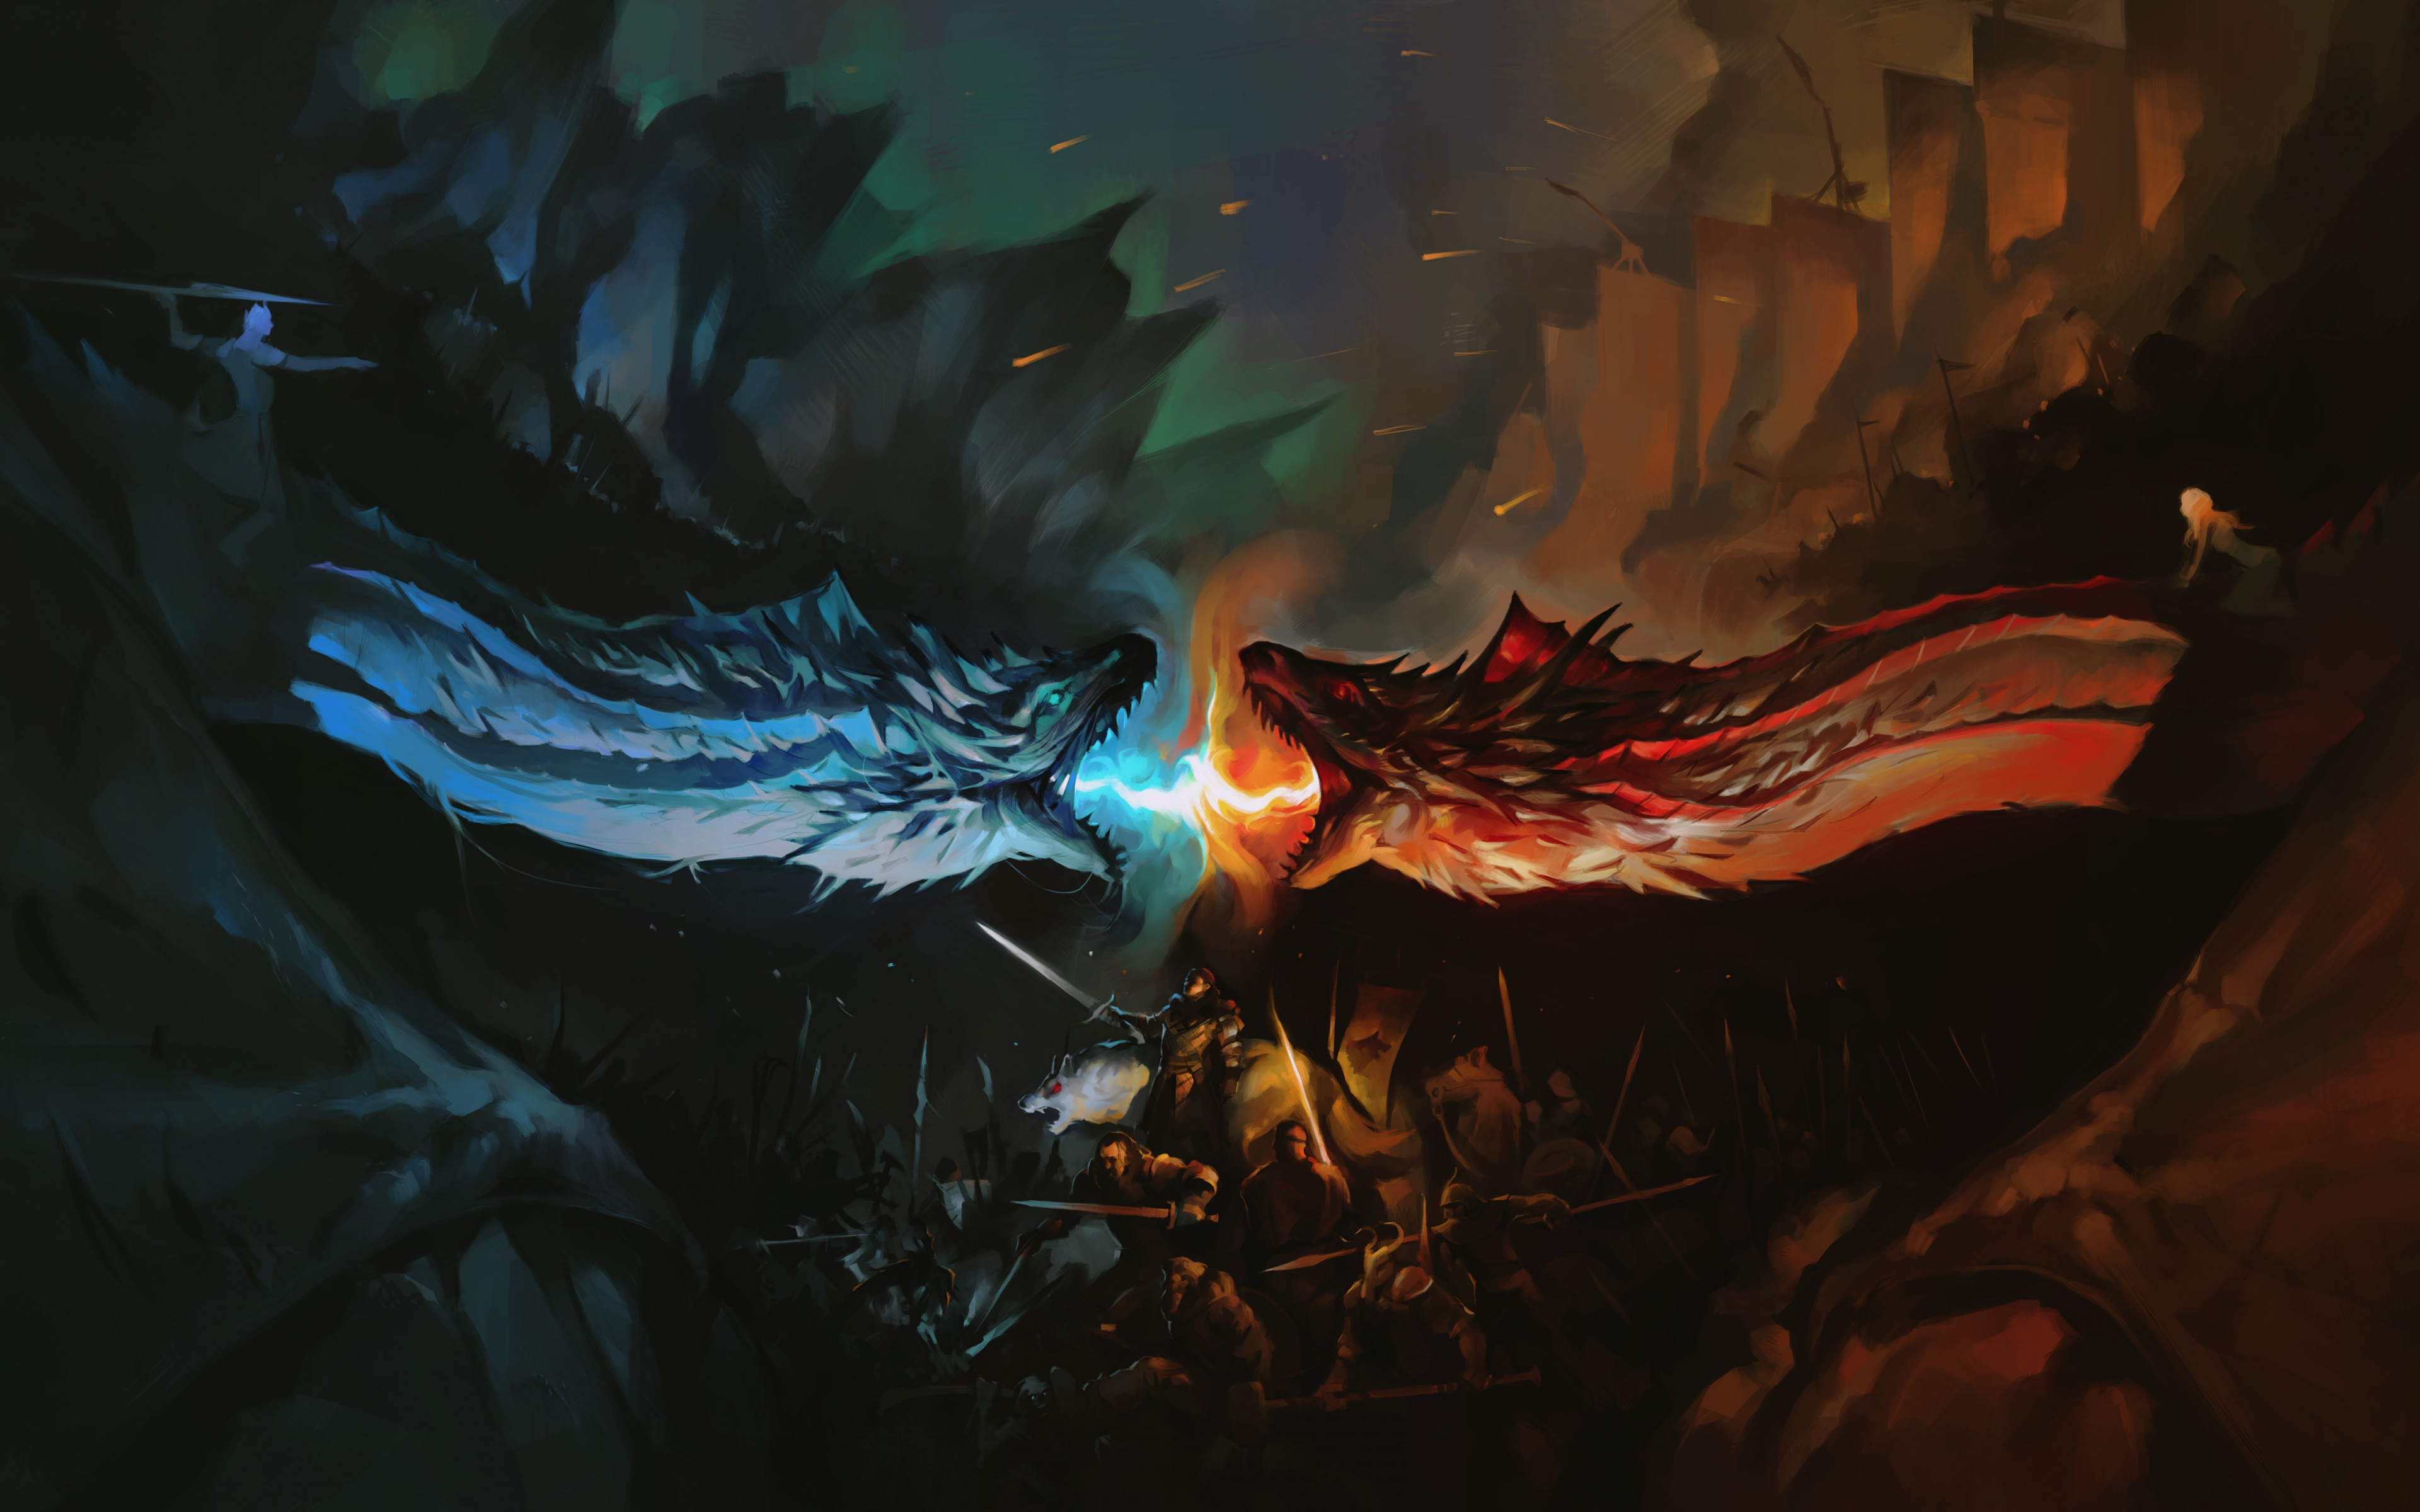 Download 3840x2400 game of thrones tv series dragons fight fan